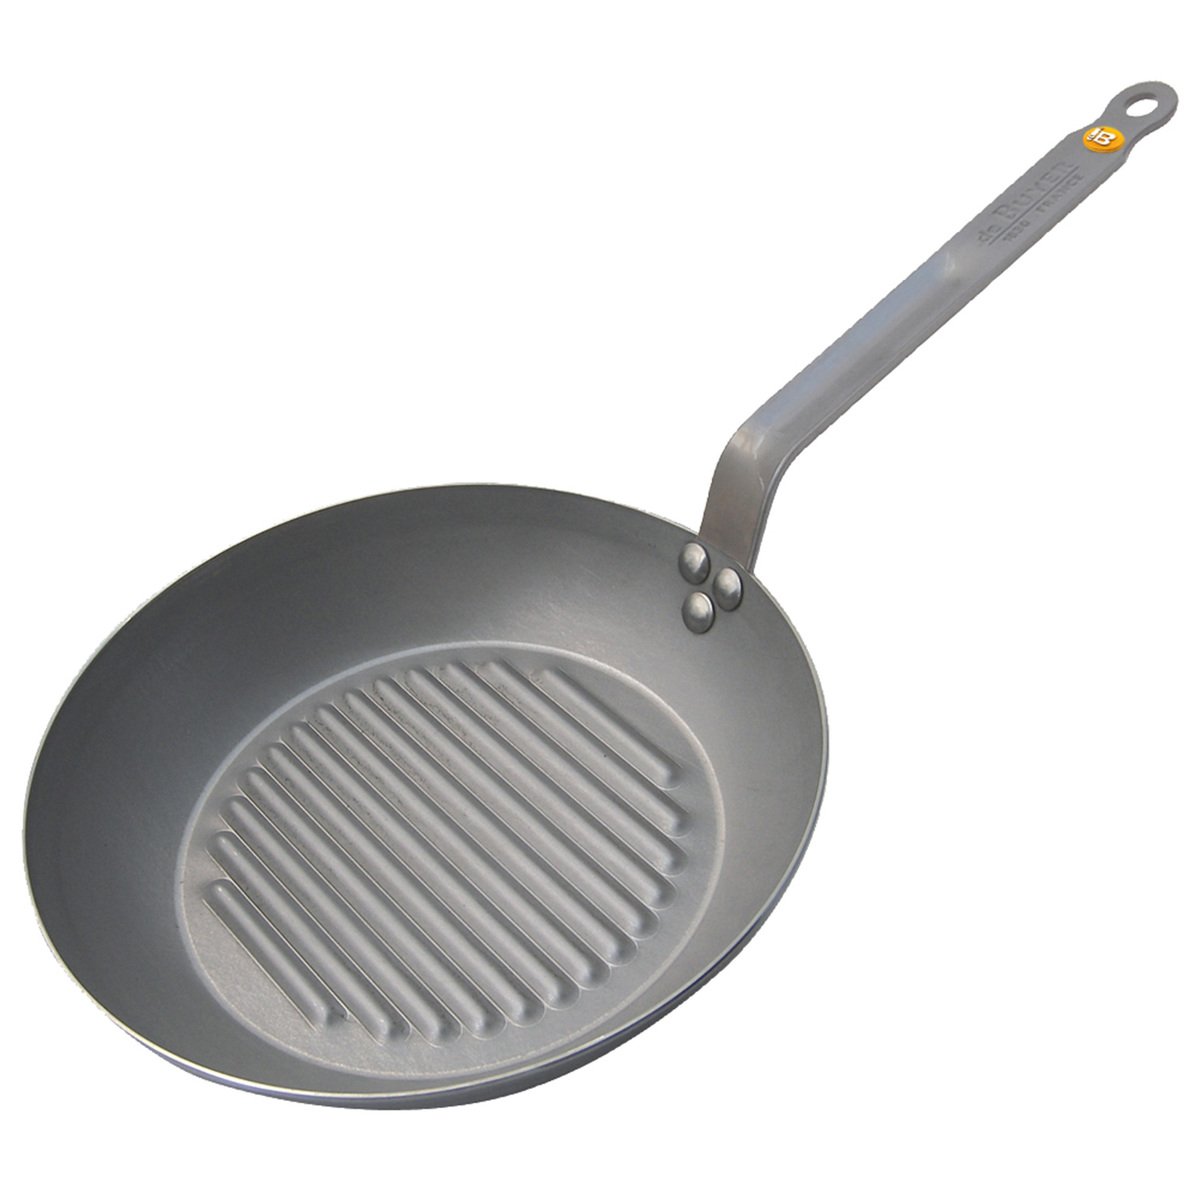 de Buyer MINERAL B Carbon Steel Griddle - Ideal for Seafood & Vegetables -  Naturally Nonstick - Made in France